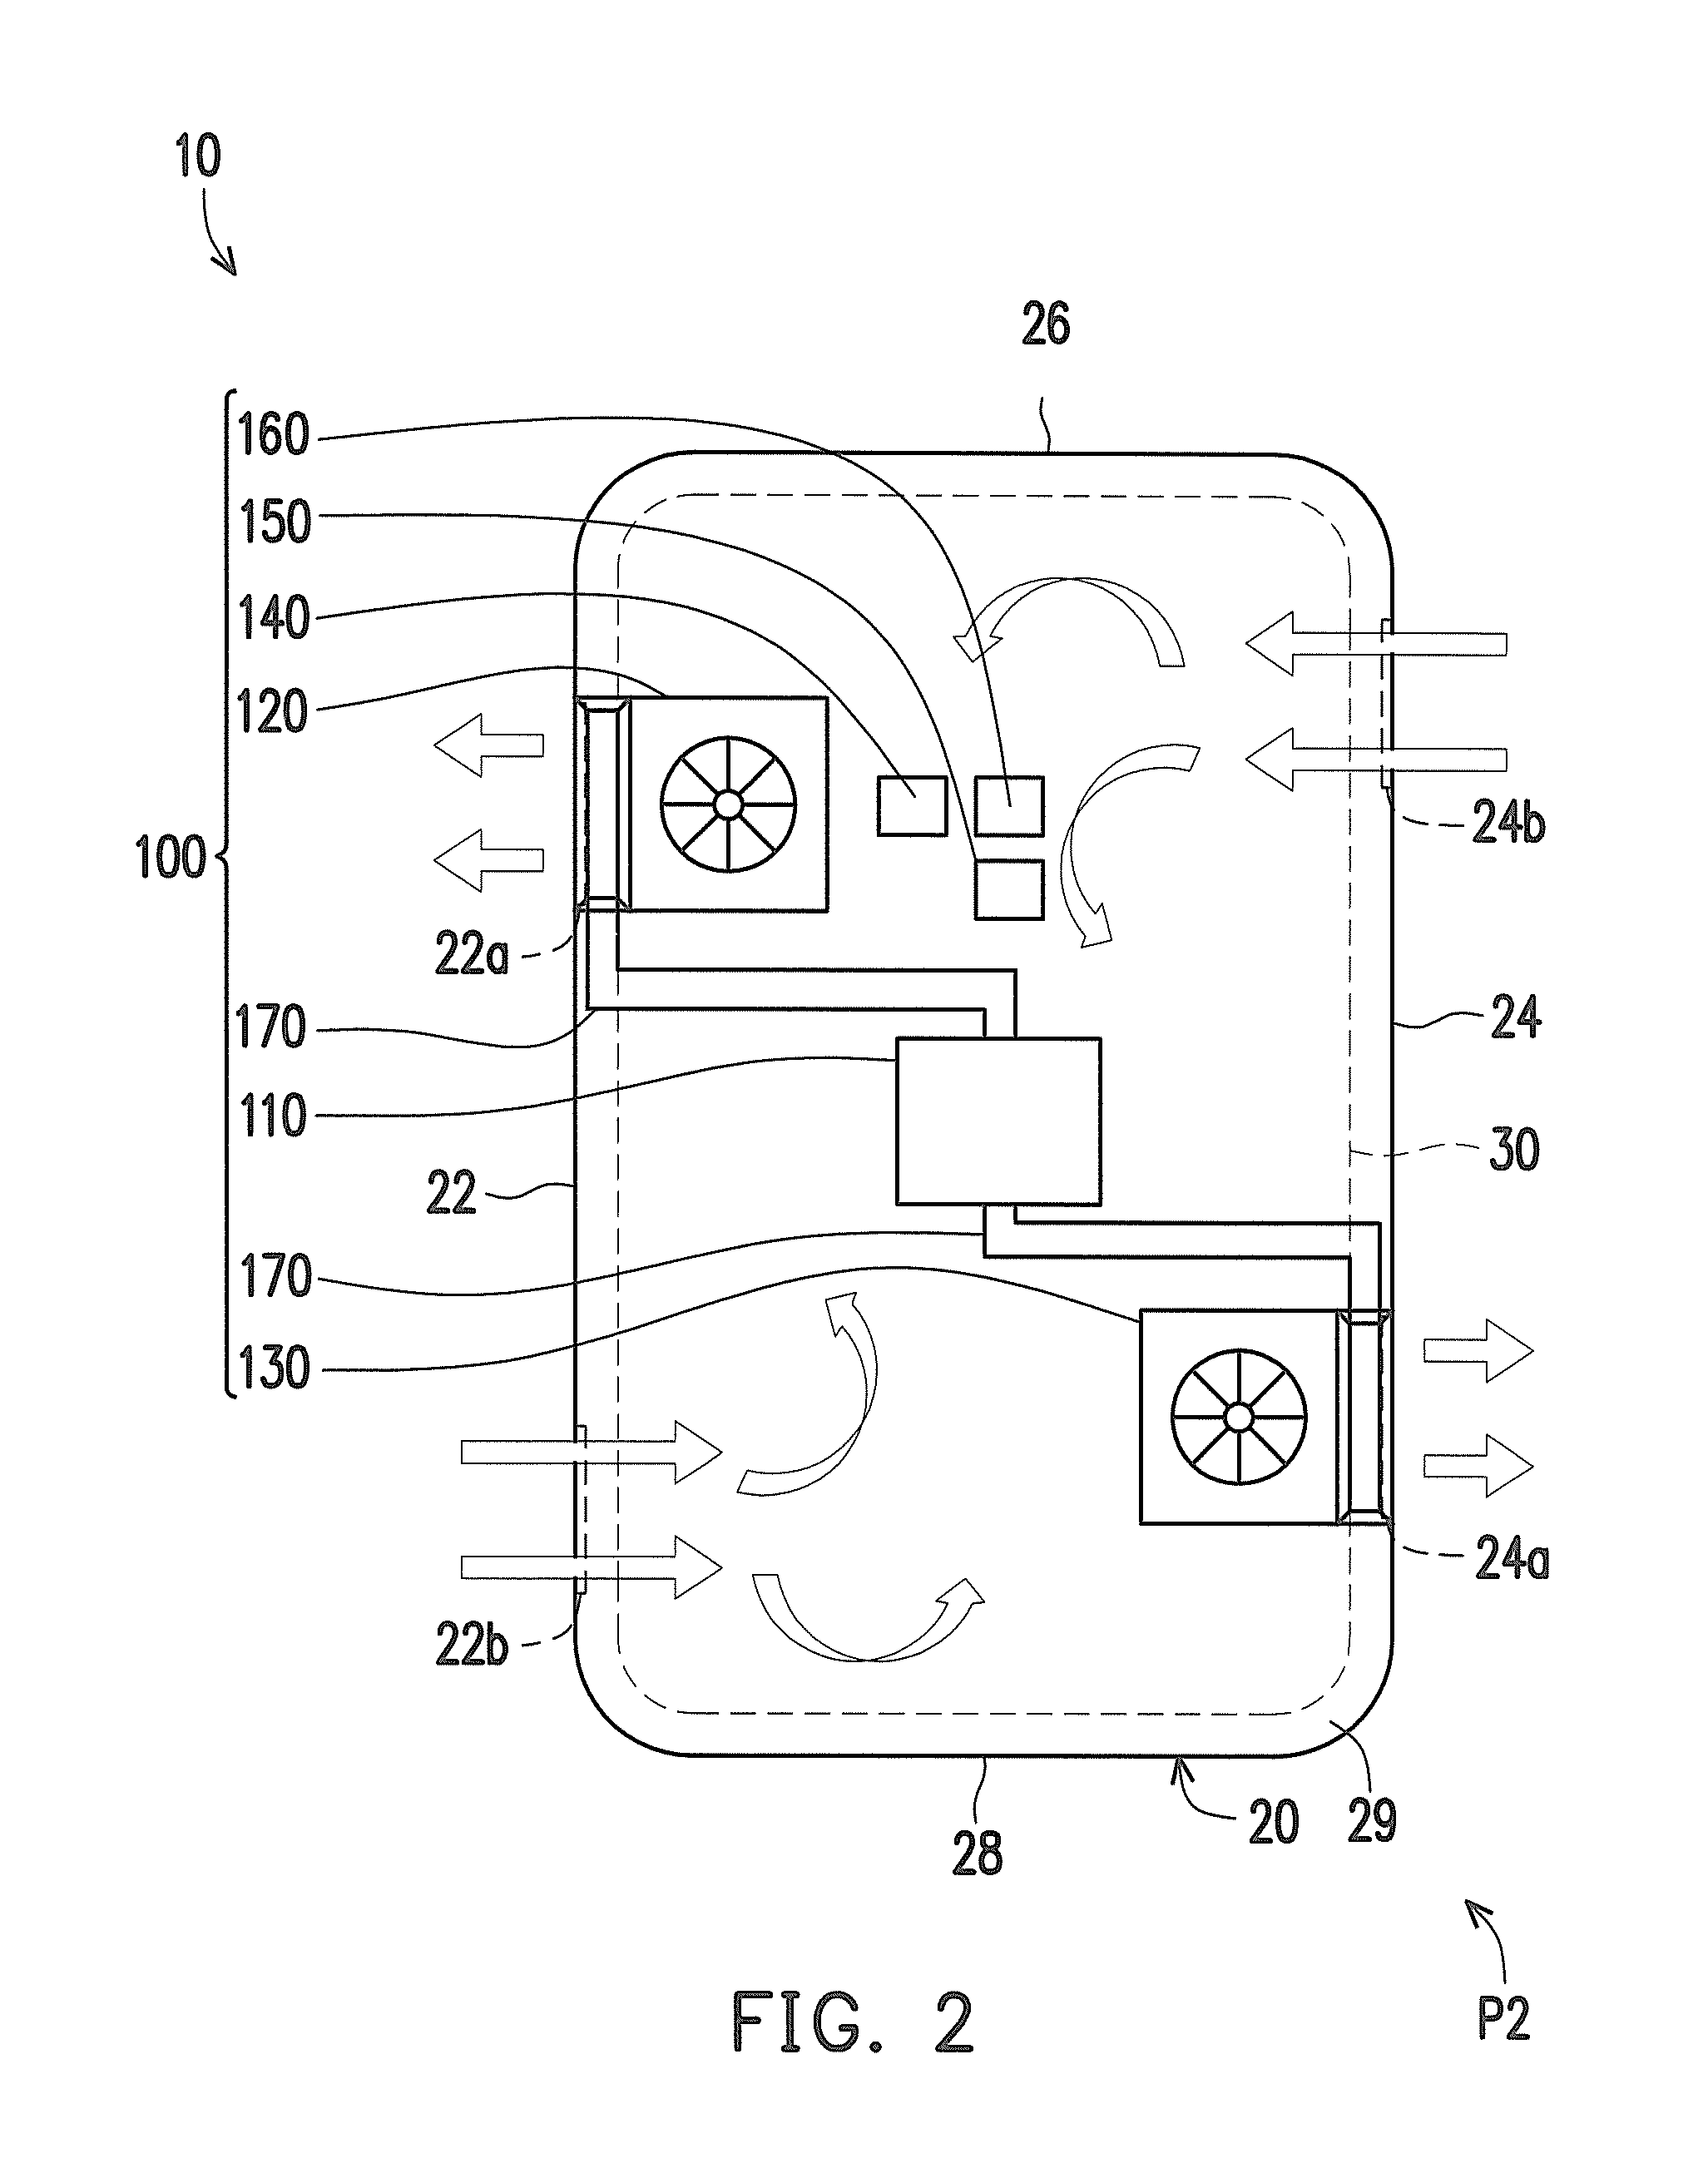 Heat dissipating system using fans